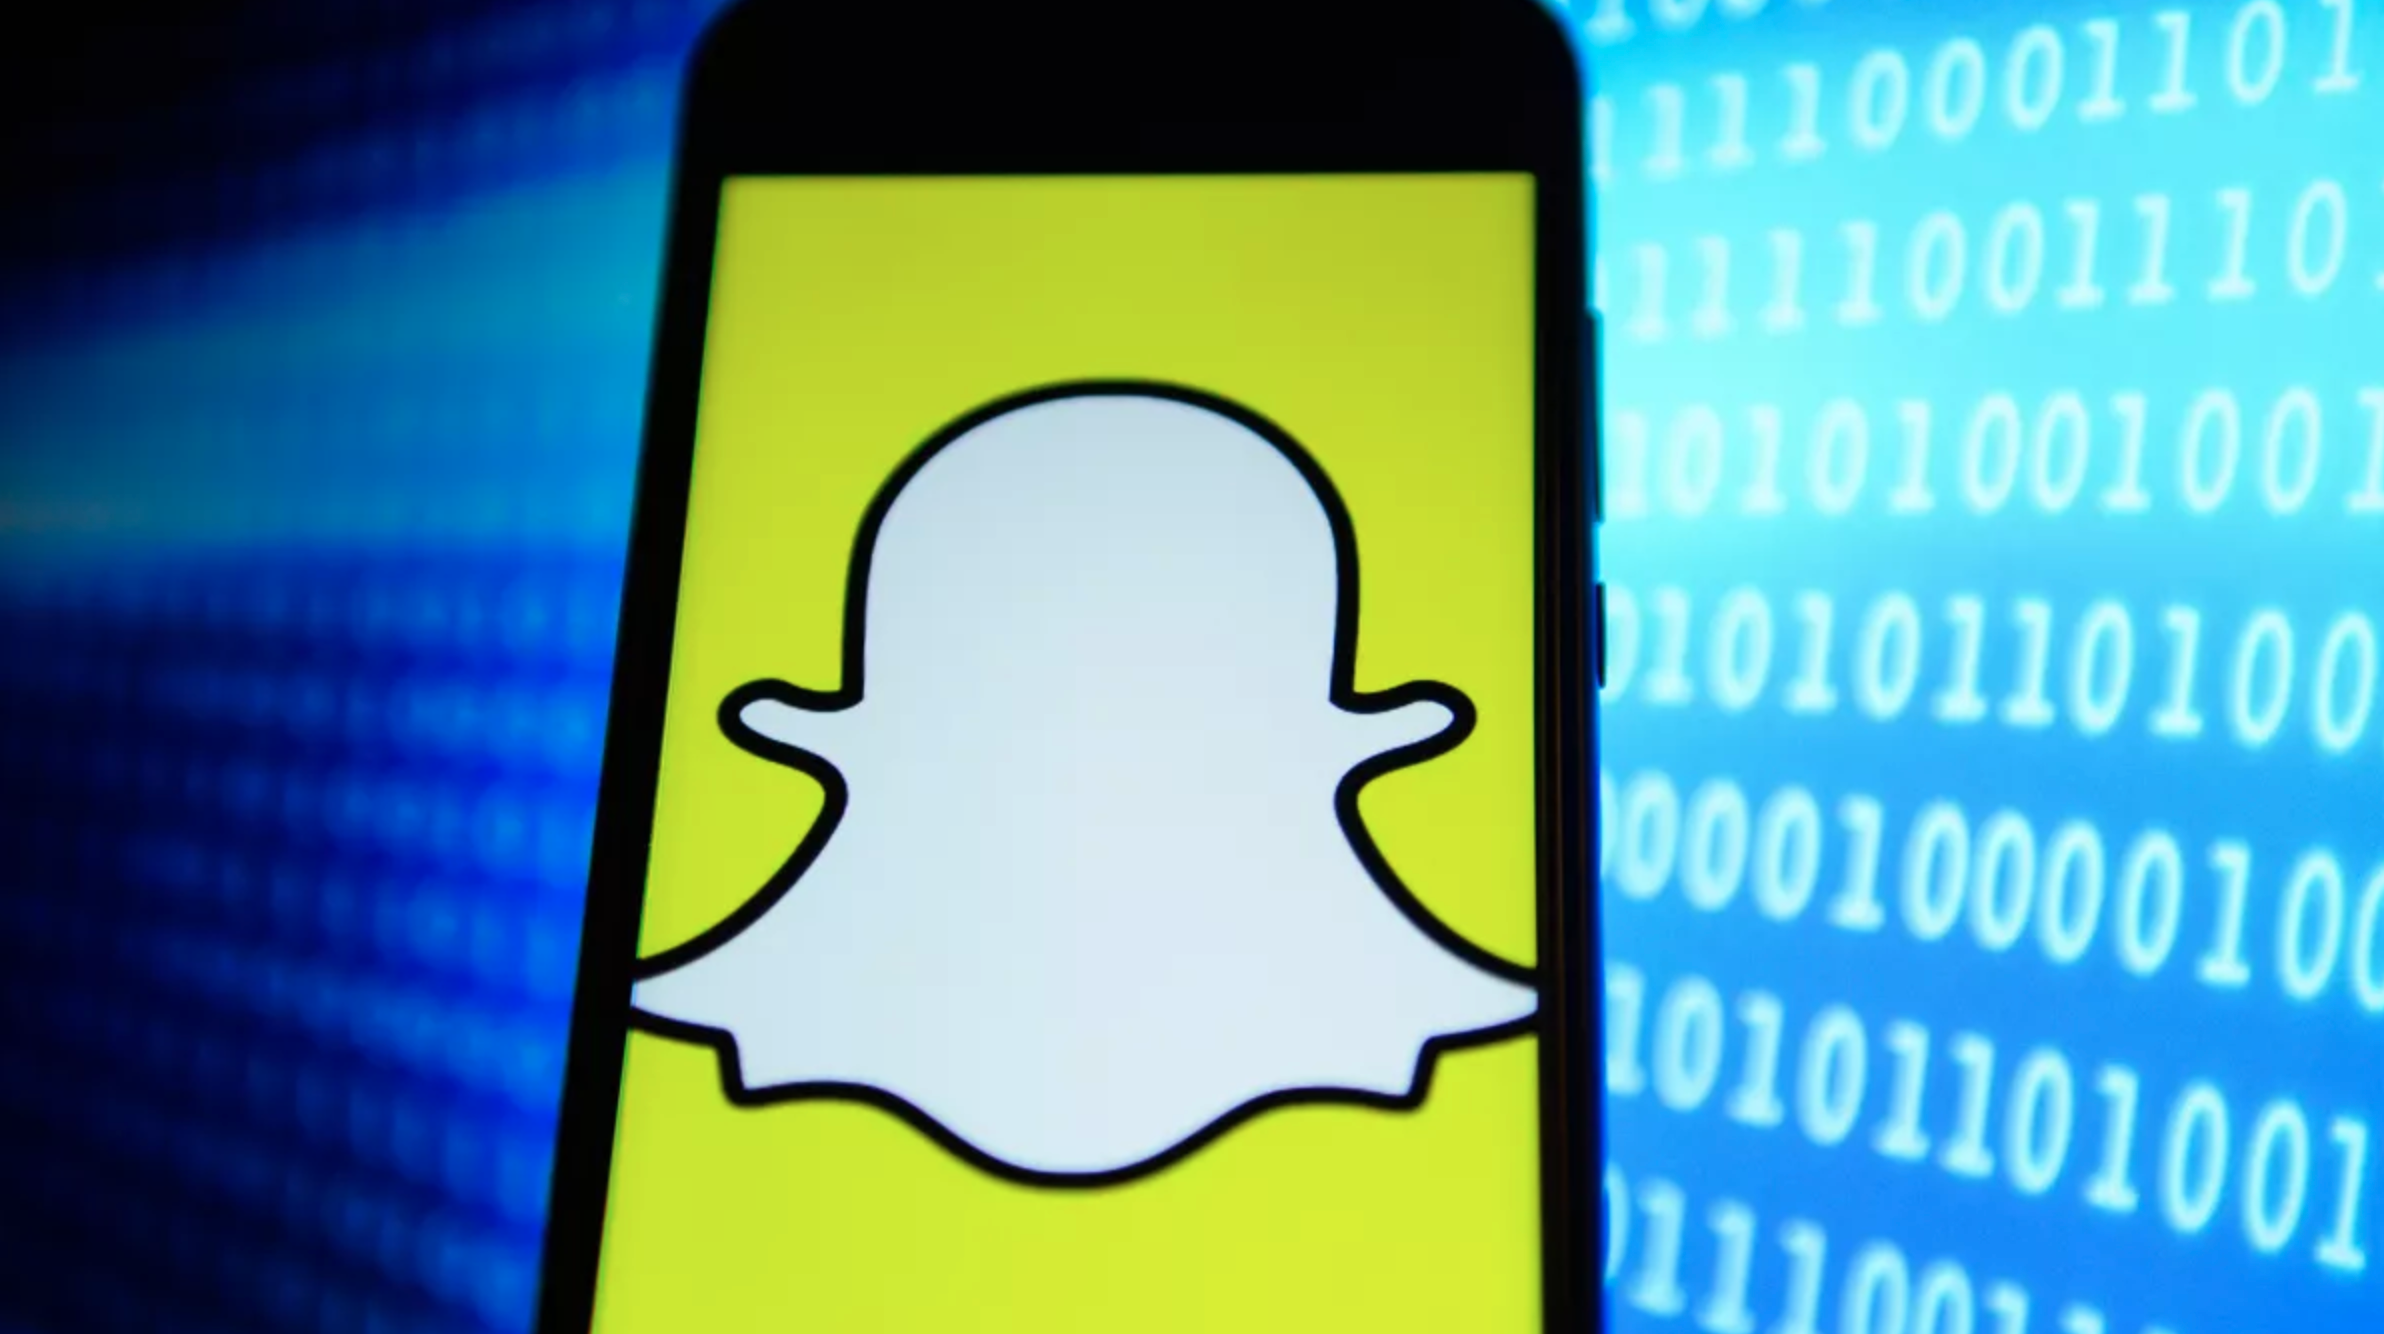 snapchat spy, read others snapchat messages